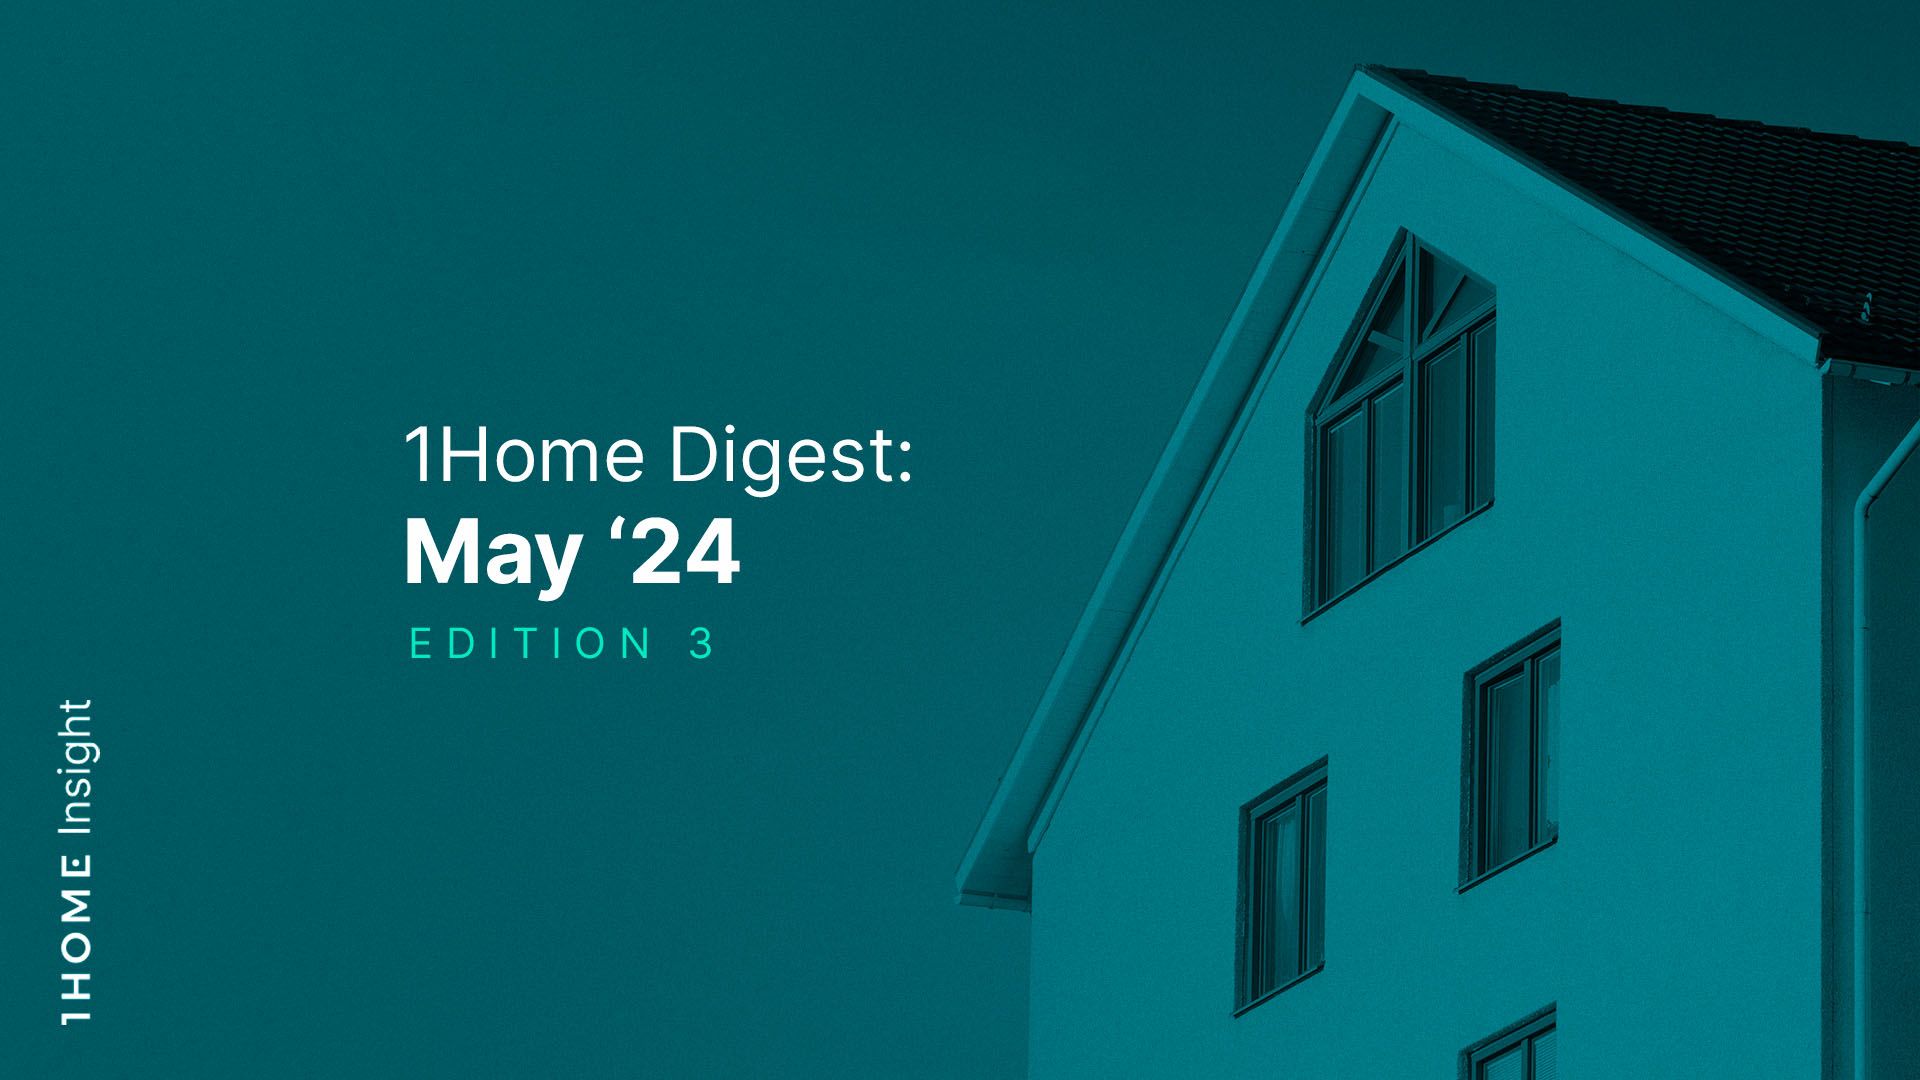 1Home Digest: May '24 Edition 3